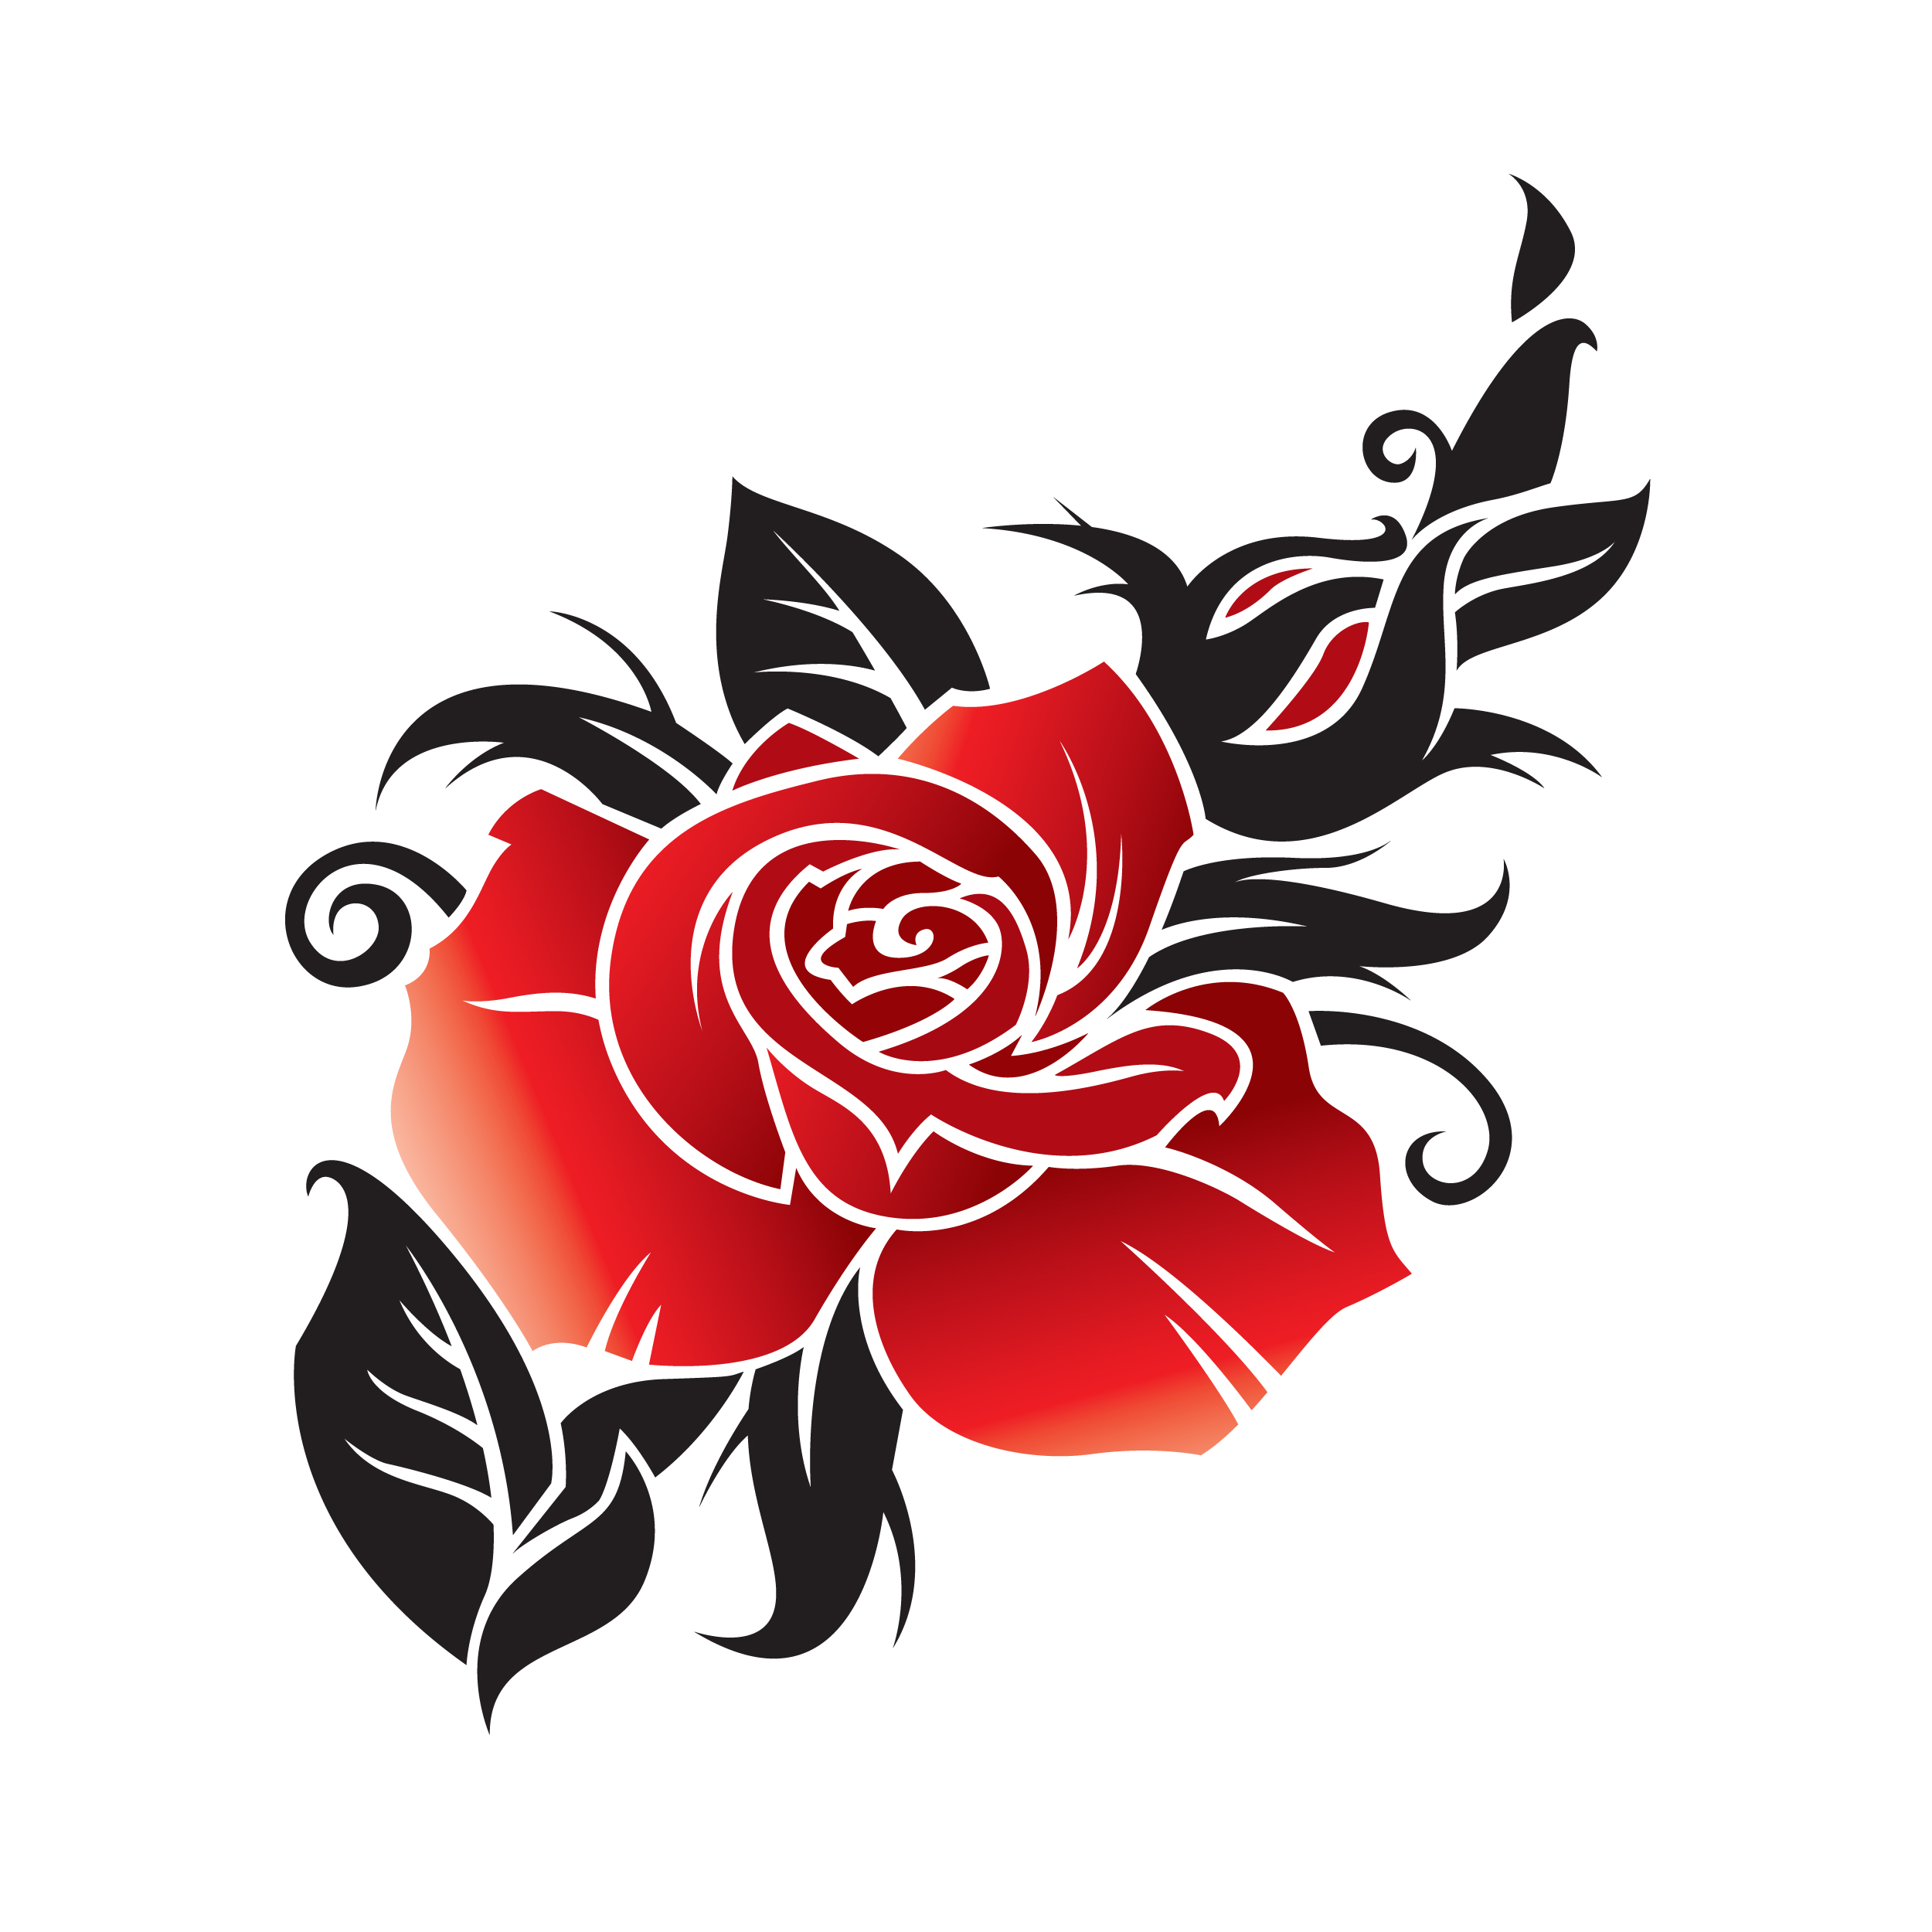 Roses rose clipart tattoo clipart image cliparting